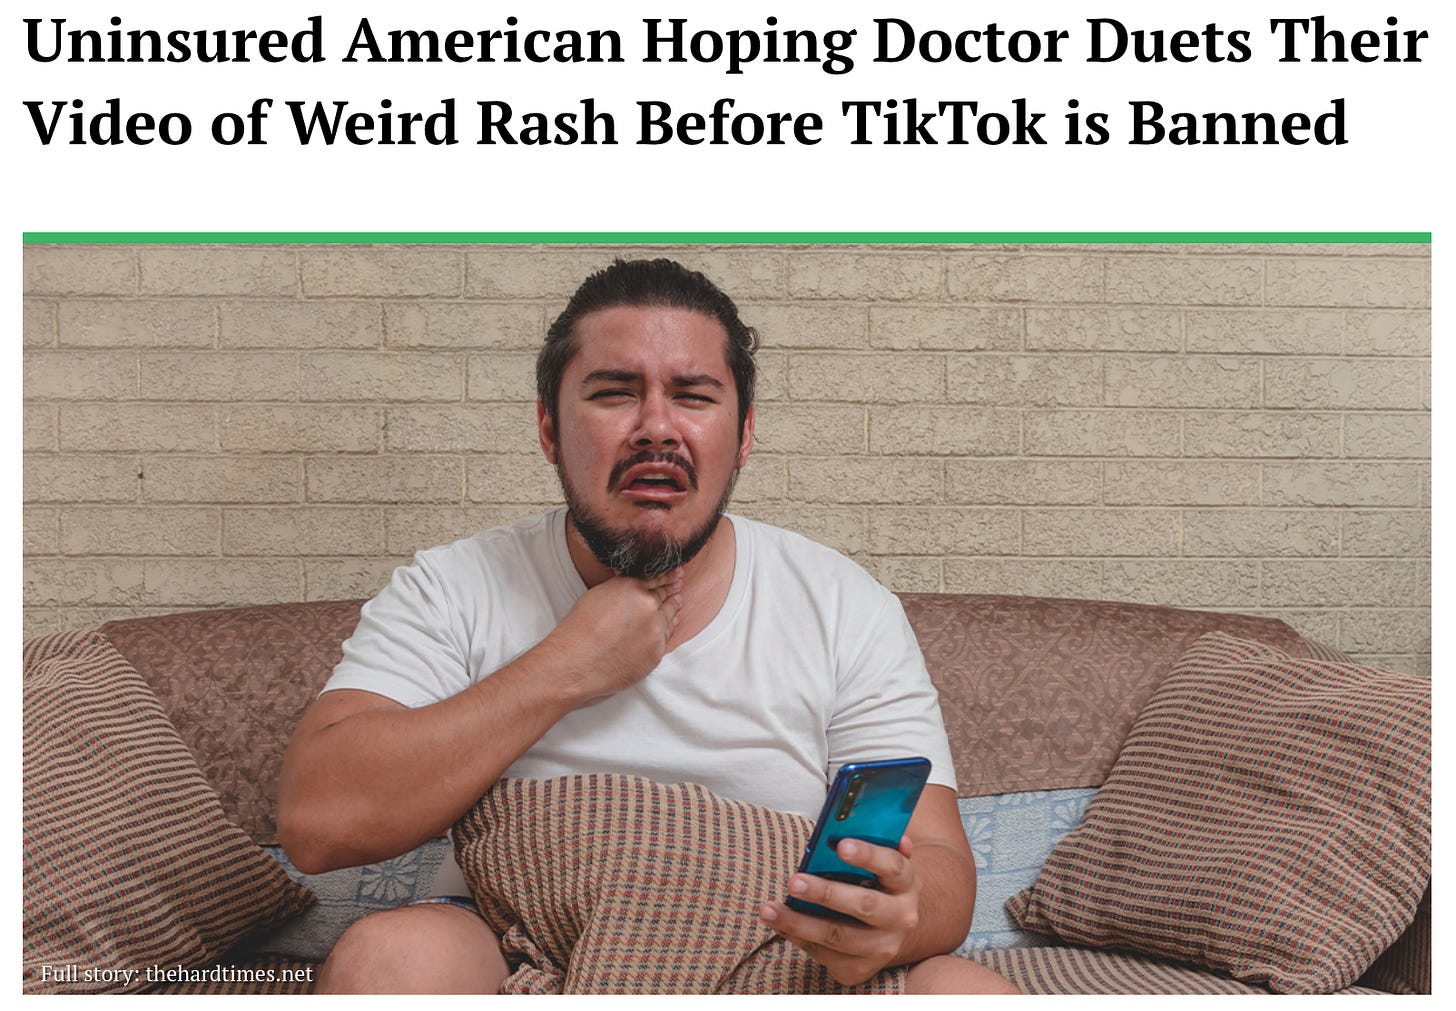 Image of headline from Hard Times, plus featured image of guy on his couch holding his hand to his neck, concerned